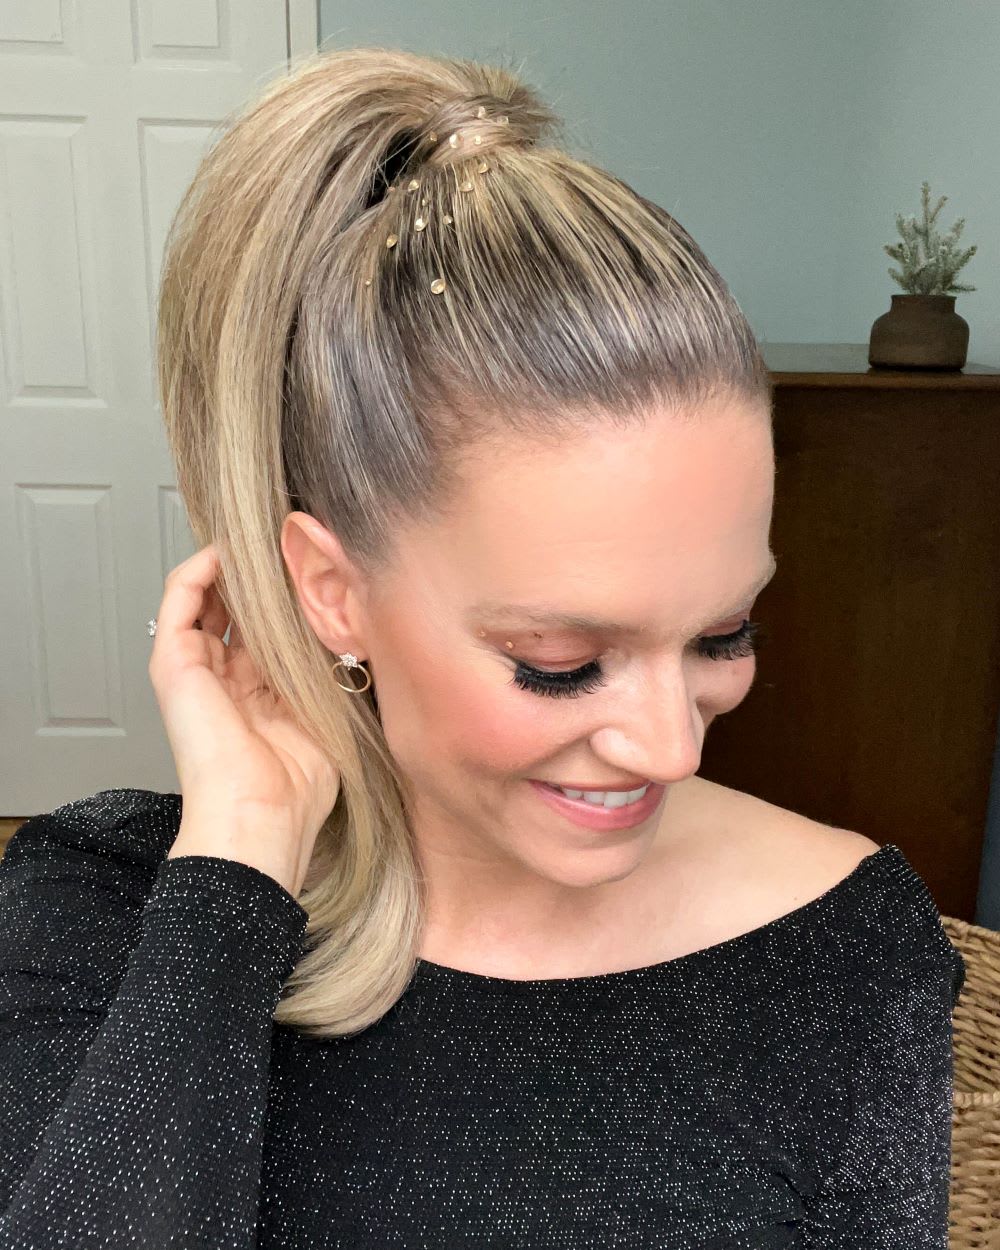 Hair How-To: Slick High Ponytail With Rhinestones 